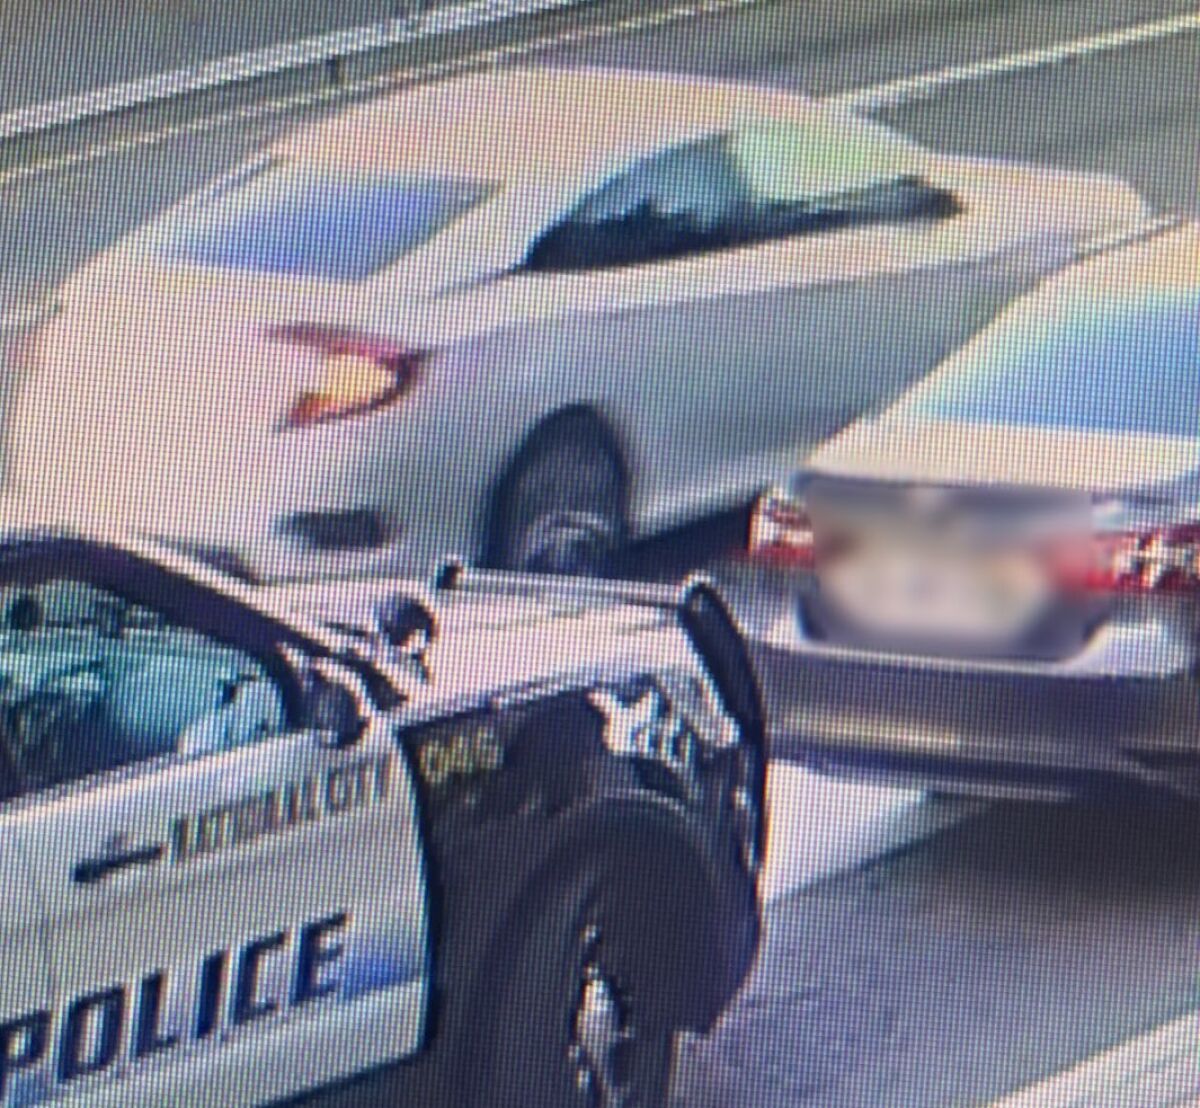 National City police say this white Honda Civic struck and injured a police officer Monday evening on National City Boulevard